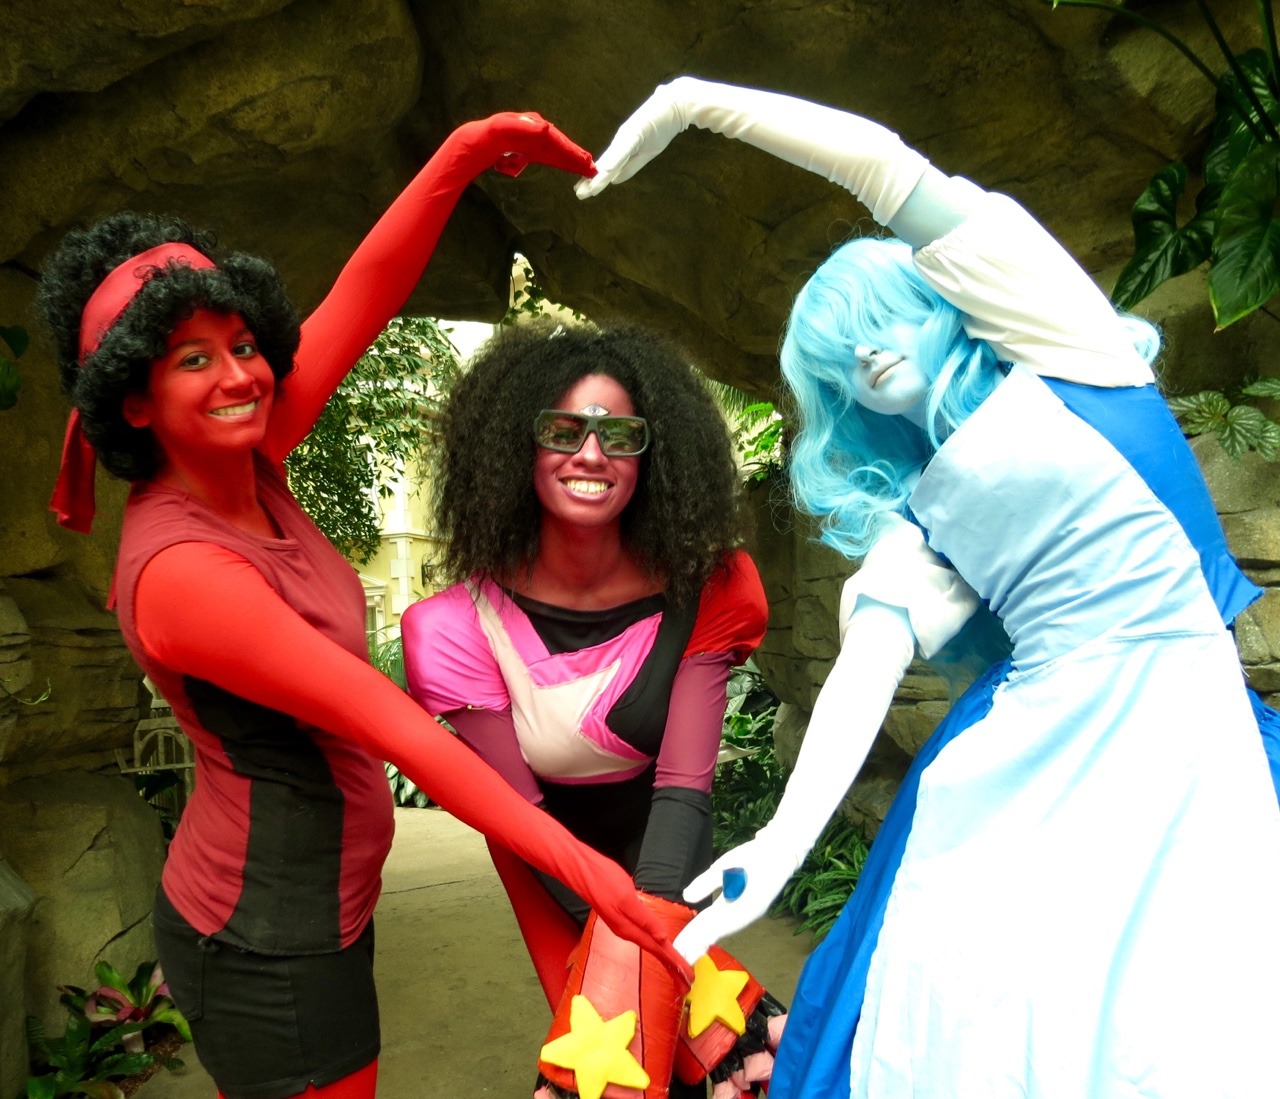 “Love is love” just wanted to wish everyone a Happy Pride Month from your Gay space rock mom ❤️💛💚💙💜 Garnet- Talalovesyou on Instagram Rupphire- seelofapprovalcosplays on Instagram follow us for more...